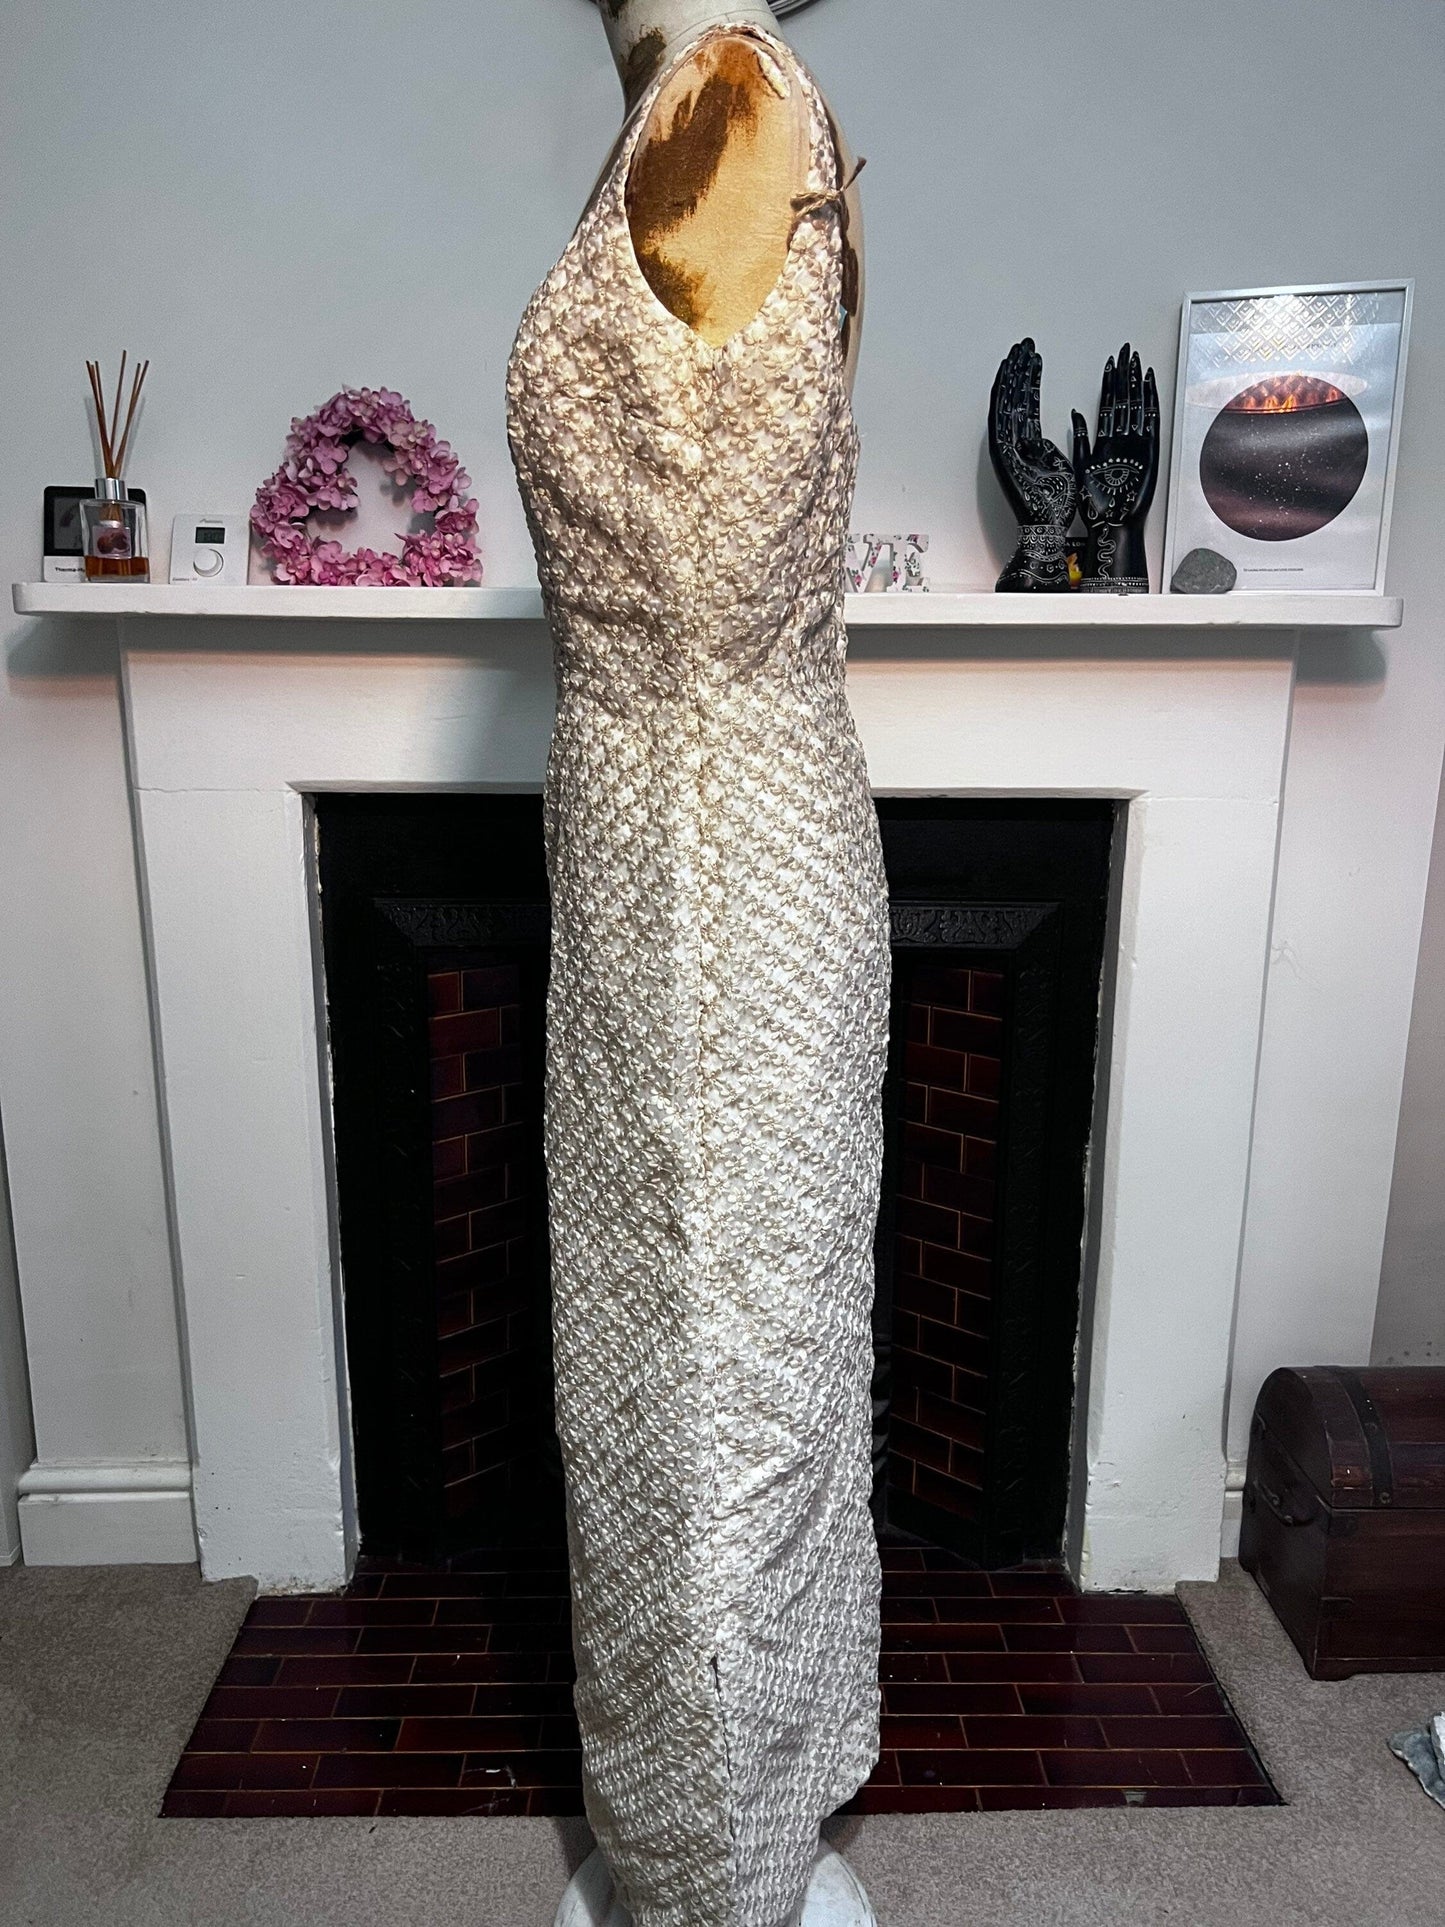 60s Vintage Cream embroidered Maxi Column Dress - Mesh Netting with Individual Embroidered Flower Details over - 10-12